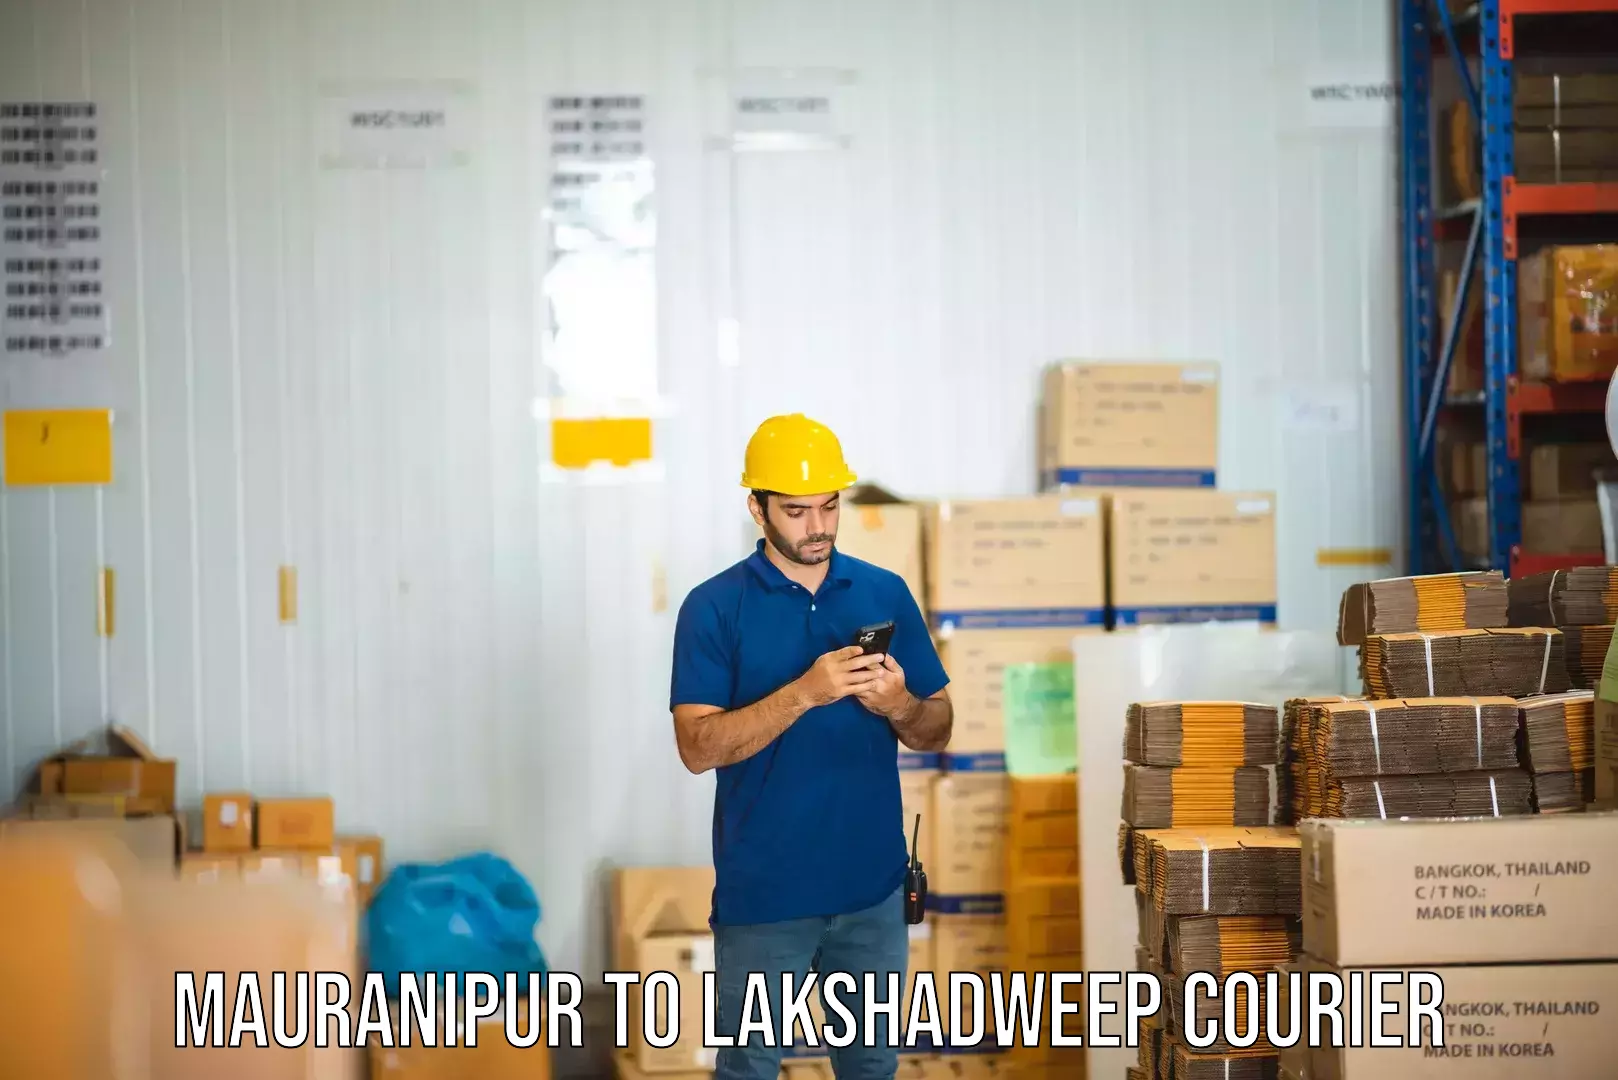 24/7 courier service Mauranipur to Lakshadweep